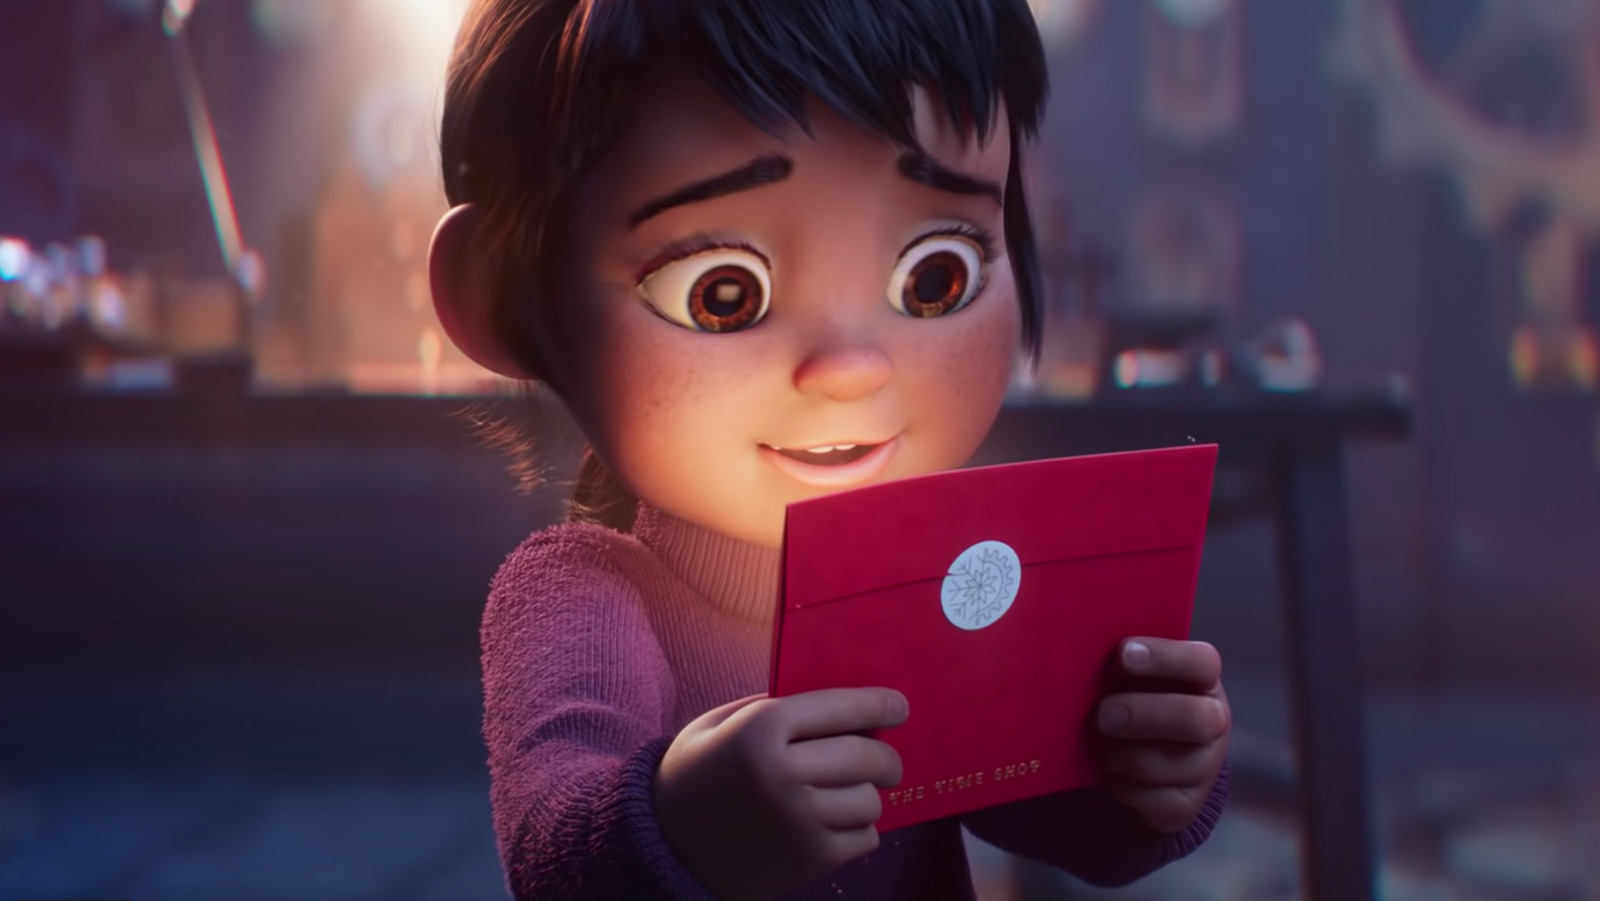 ChickFilA Just Released Its Annual Animated Holiday Film